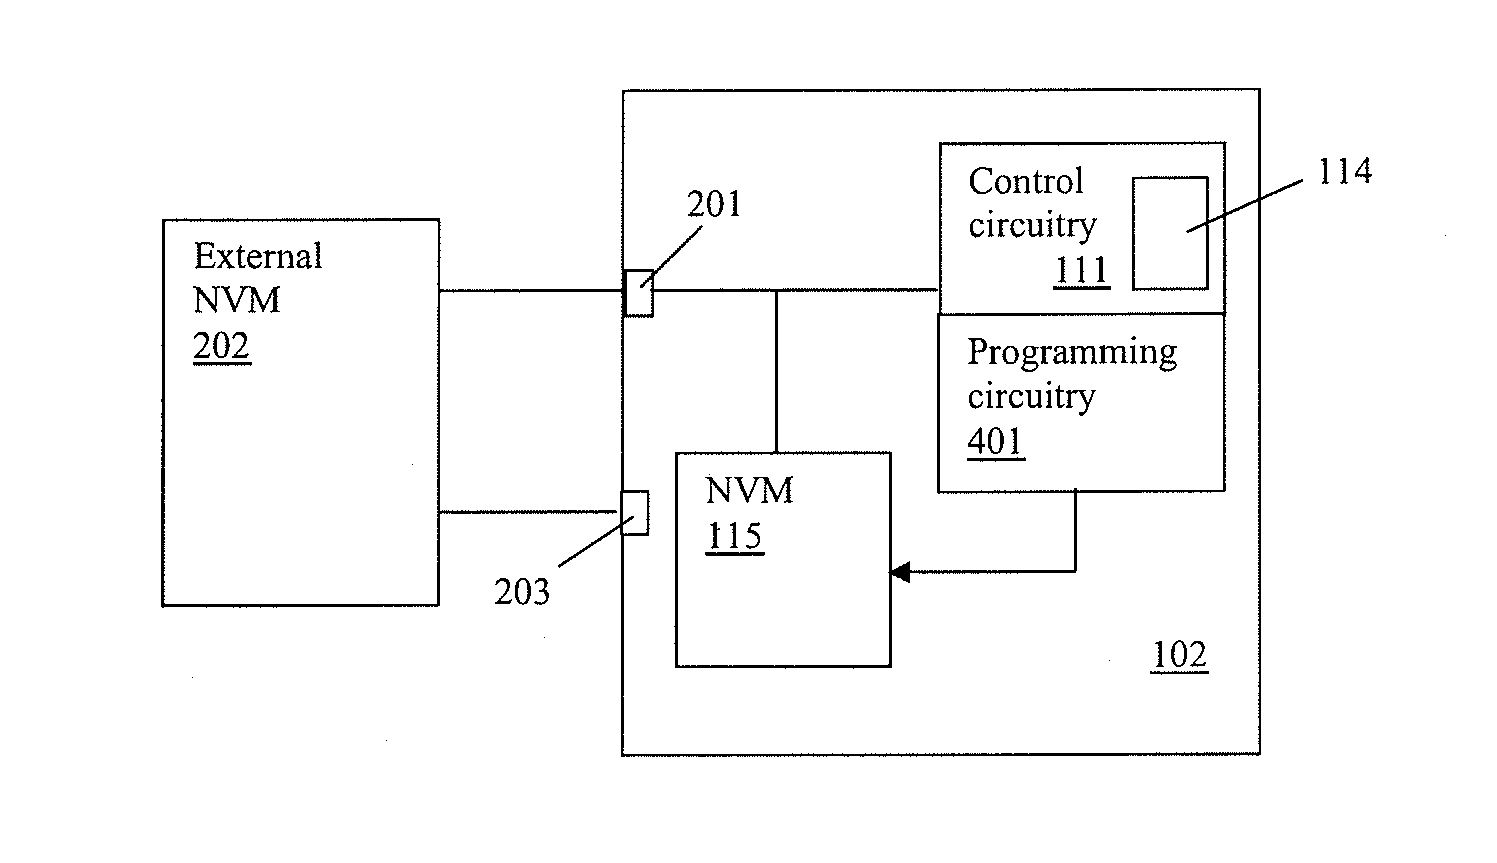 Power management apparatus and methods